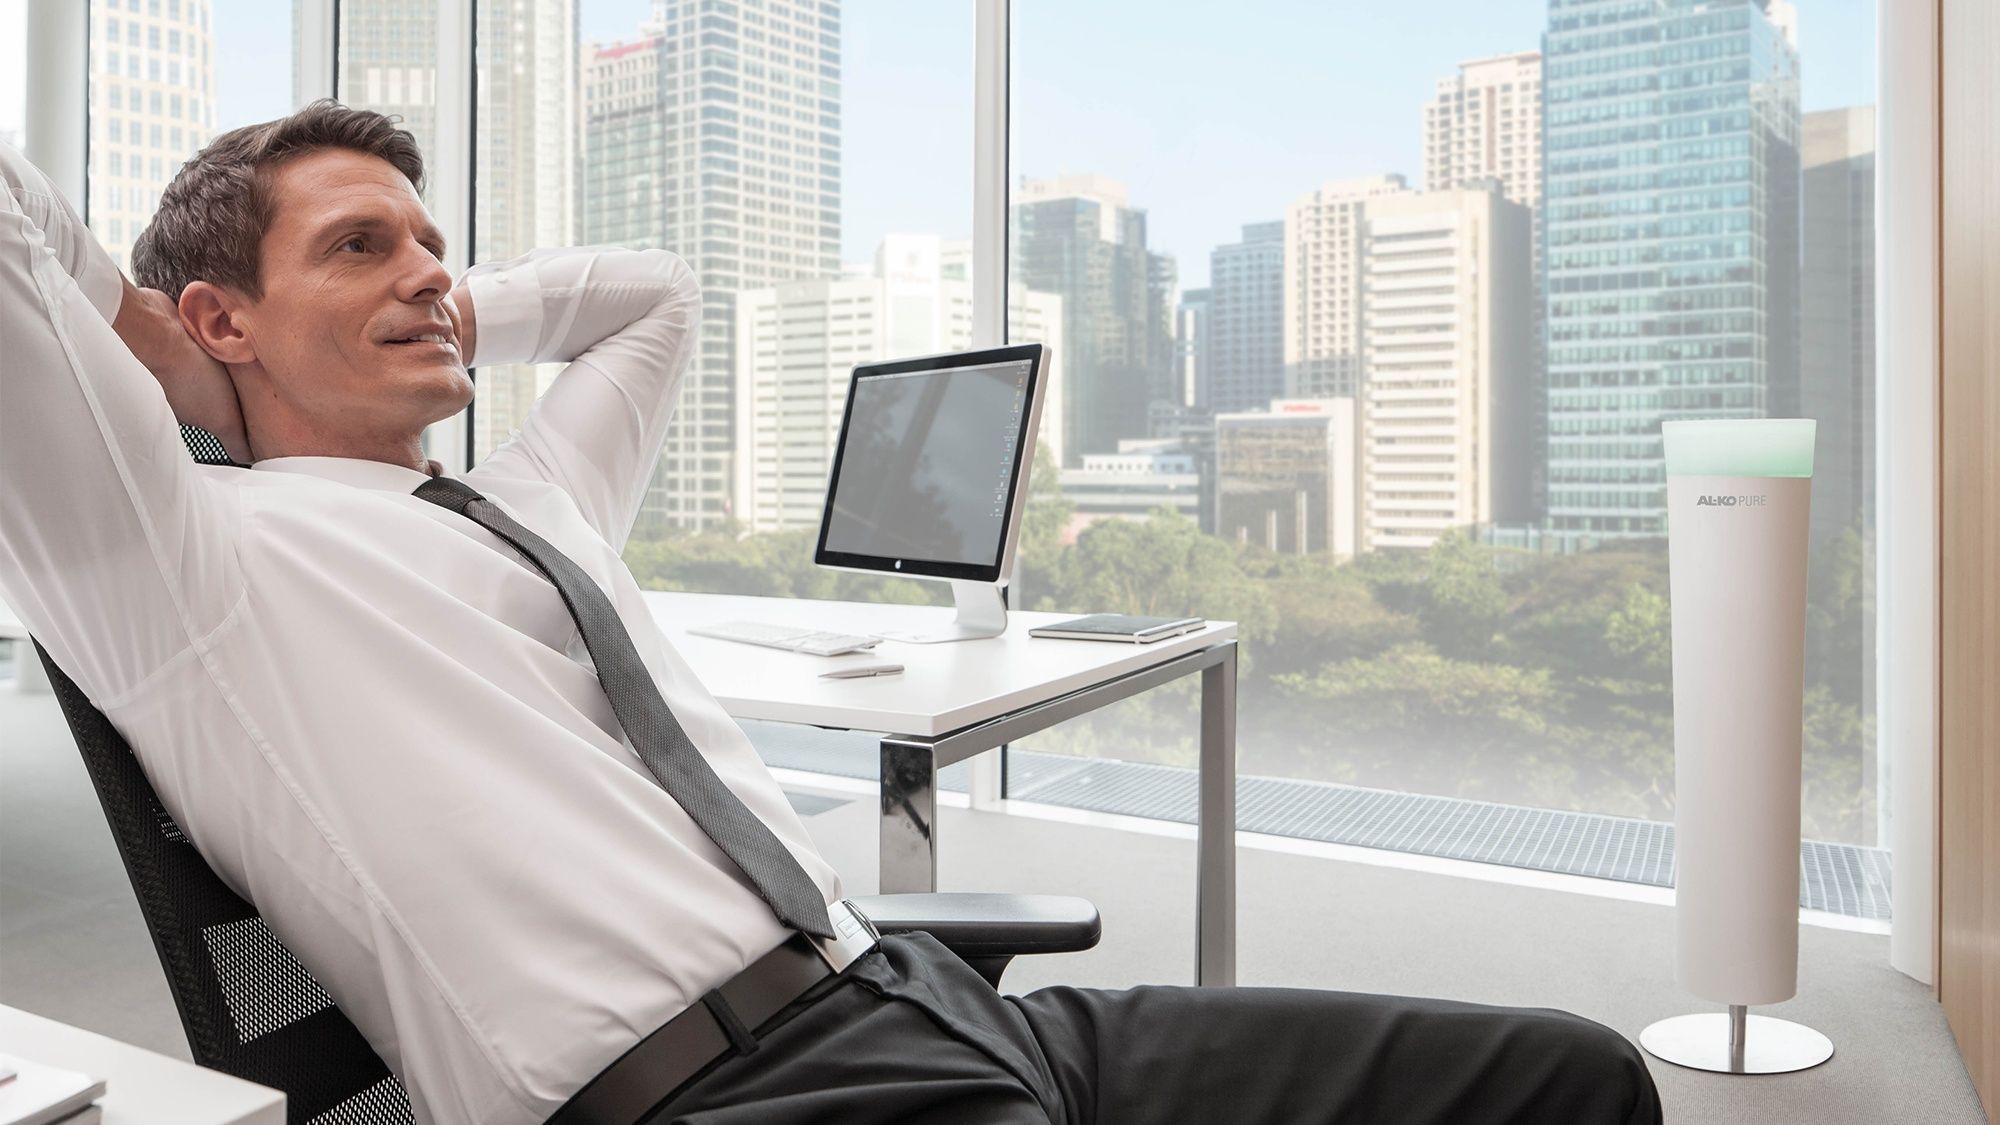 Man sits relaxed in the office next to his room air filter